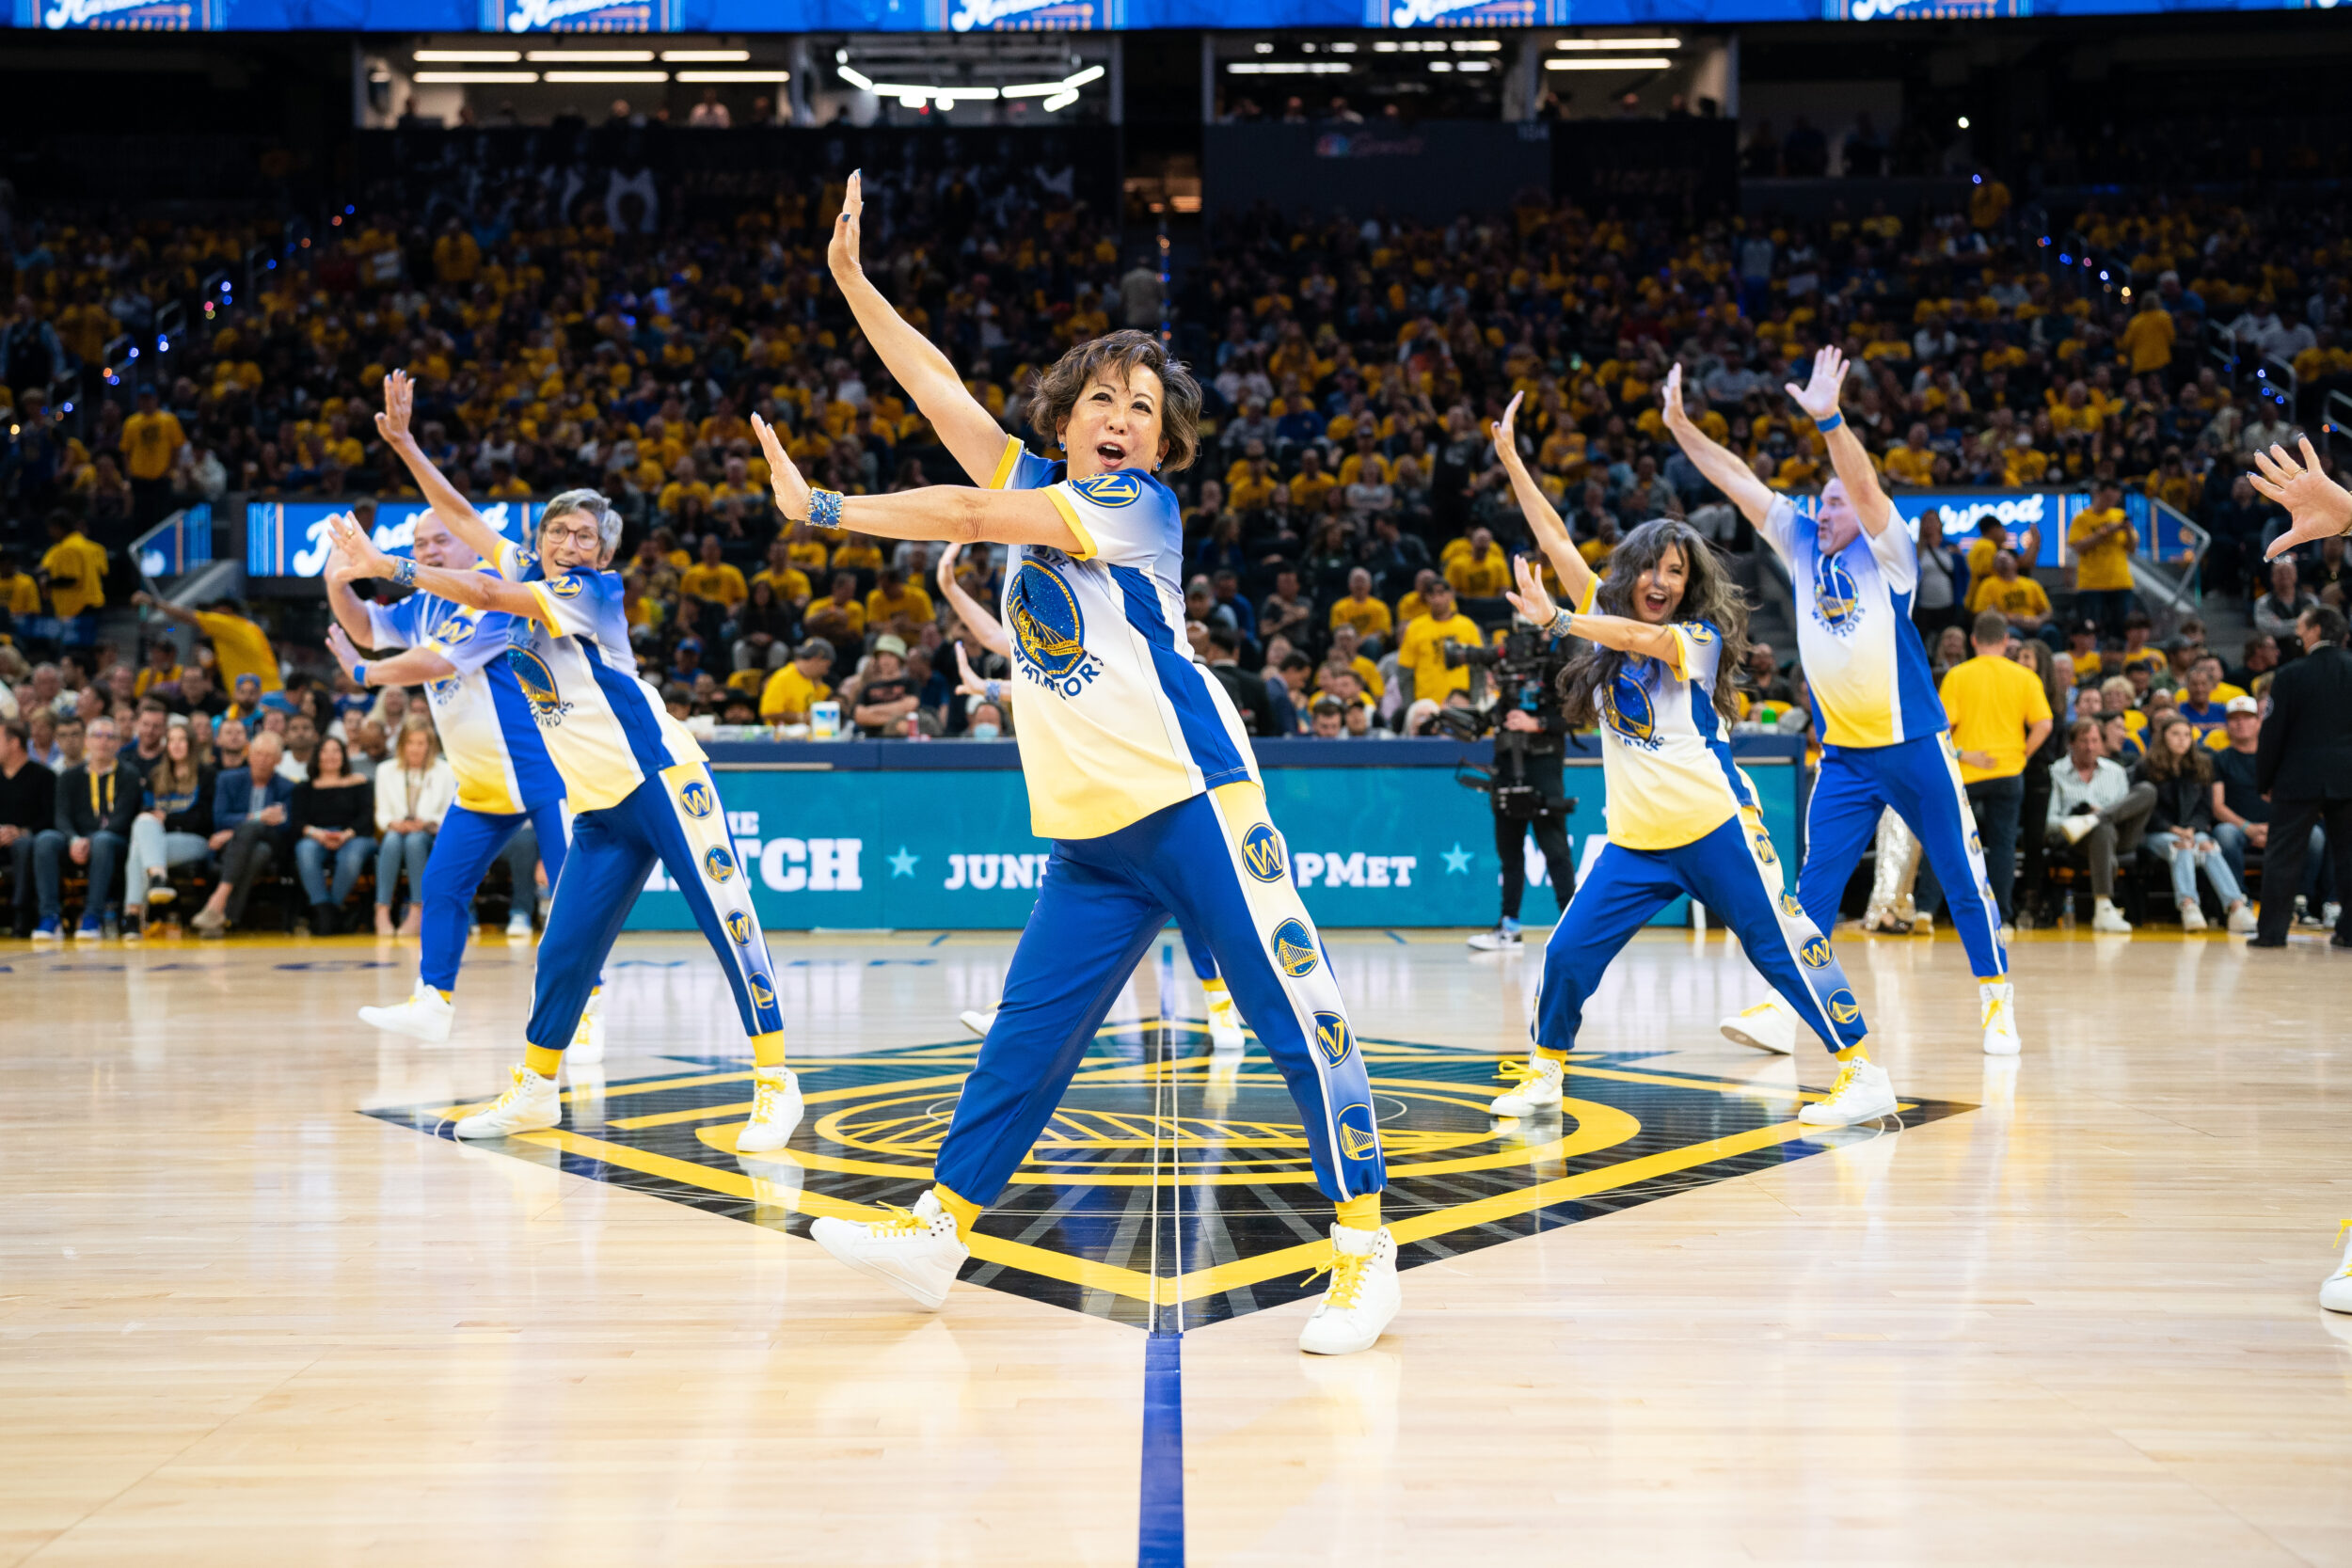 The Golden State Warriors' senior dance squad wows the NBA